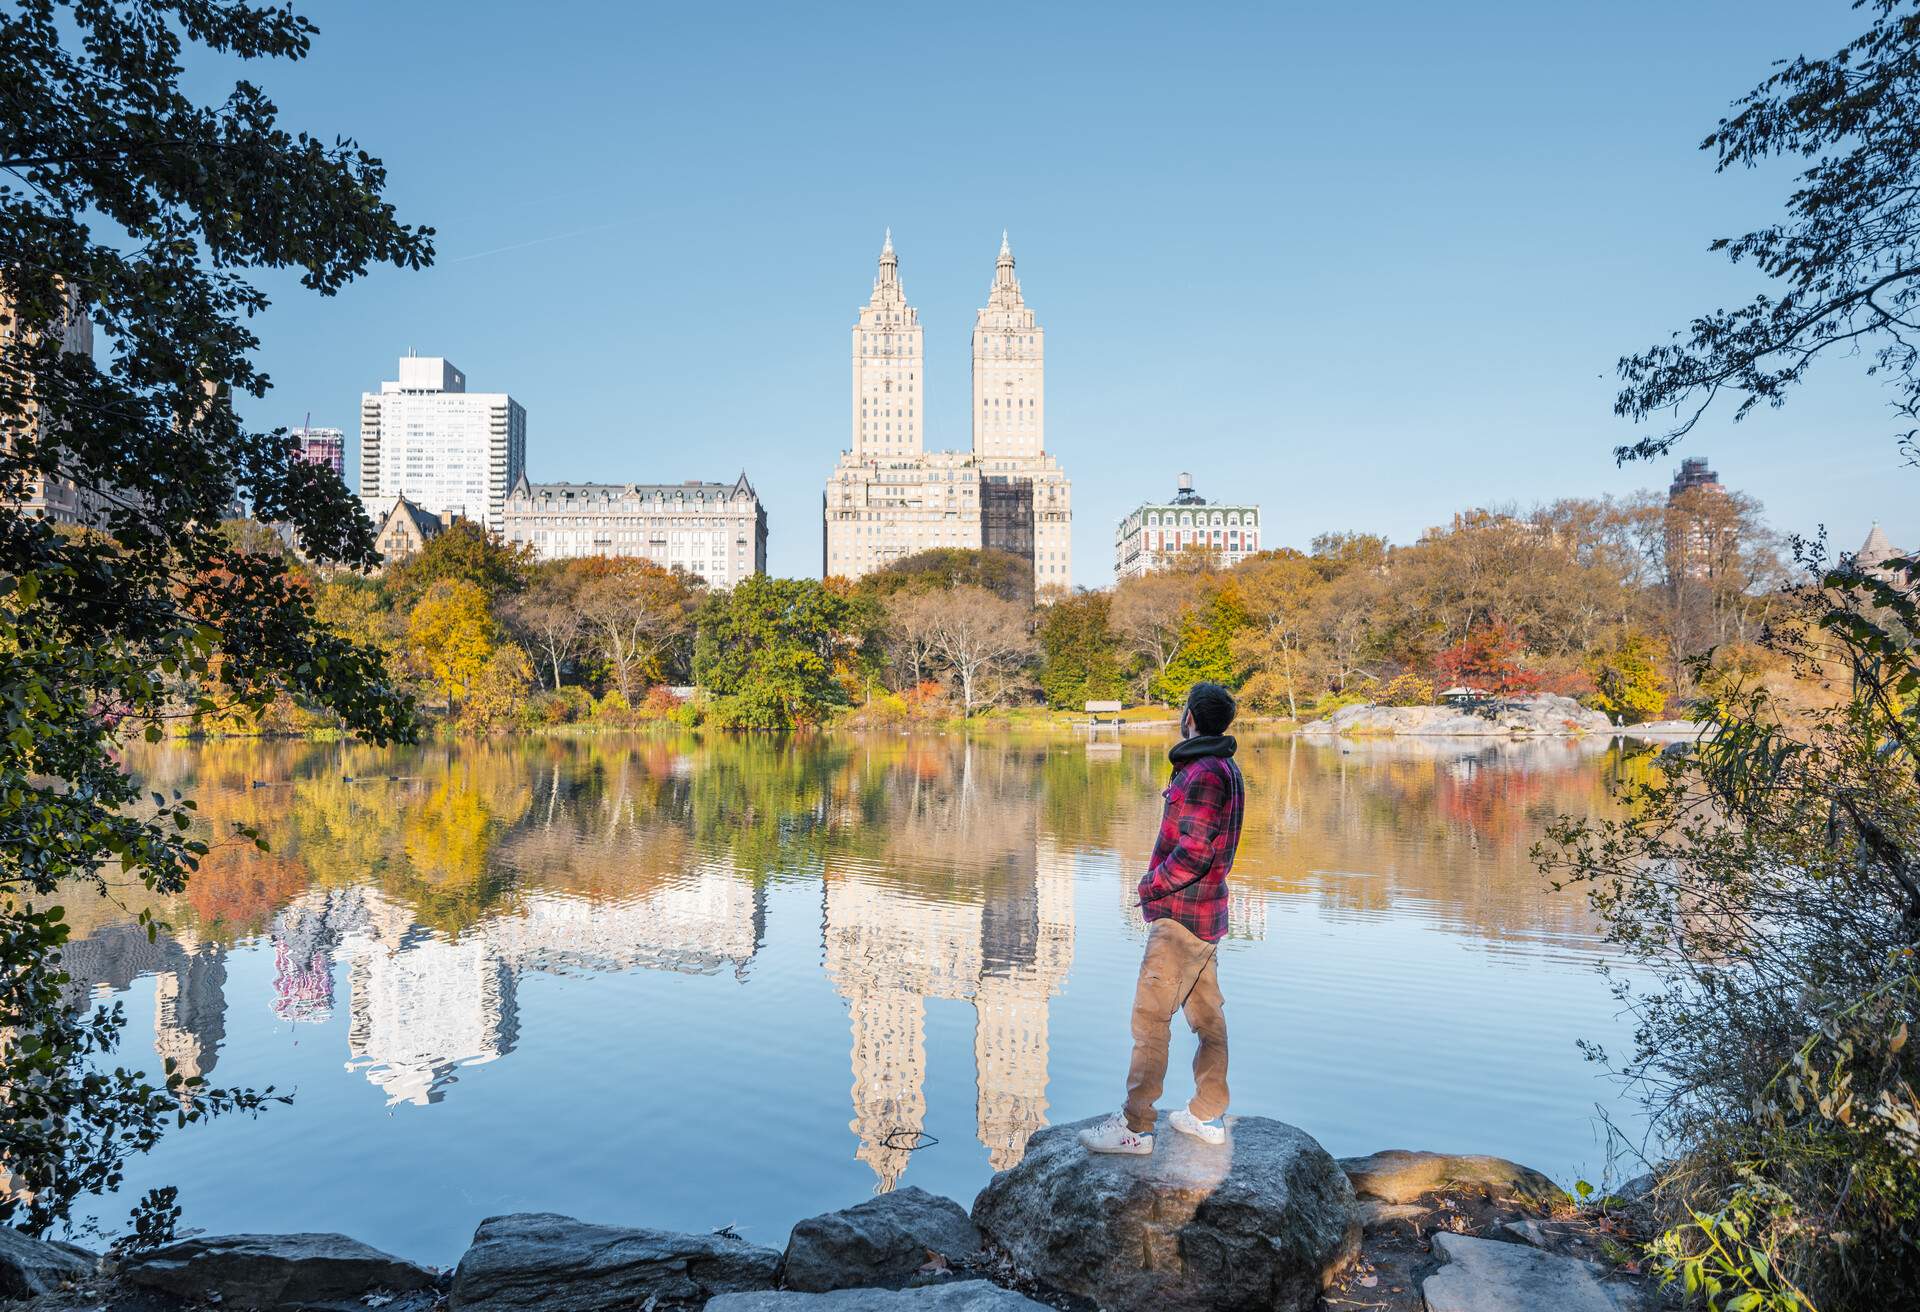 dest_usa_new_york_nyc_central-park_autumn_fall_gettyimages-1307616962_universal_within-usage-period_91565